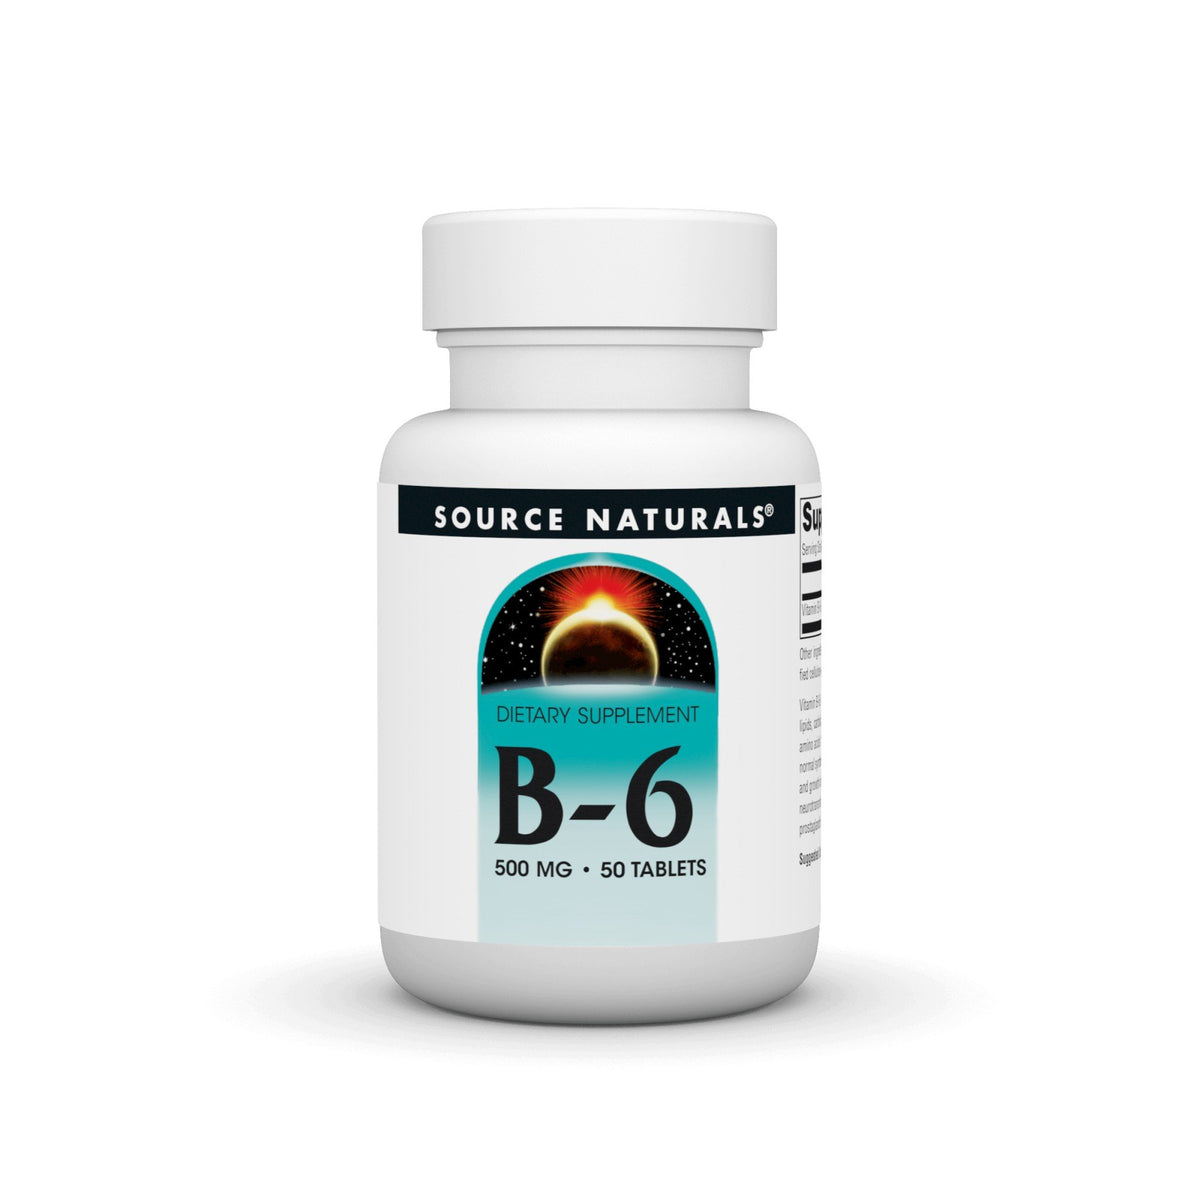 Source Naturals, Inc. Vitamin B-6 500mg Timed Release 50 Sustained Release Tablet